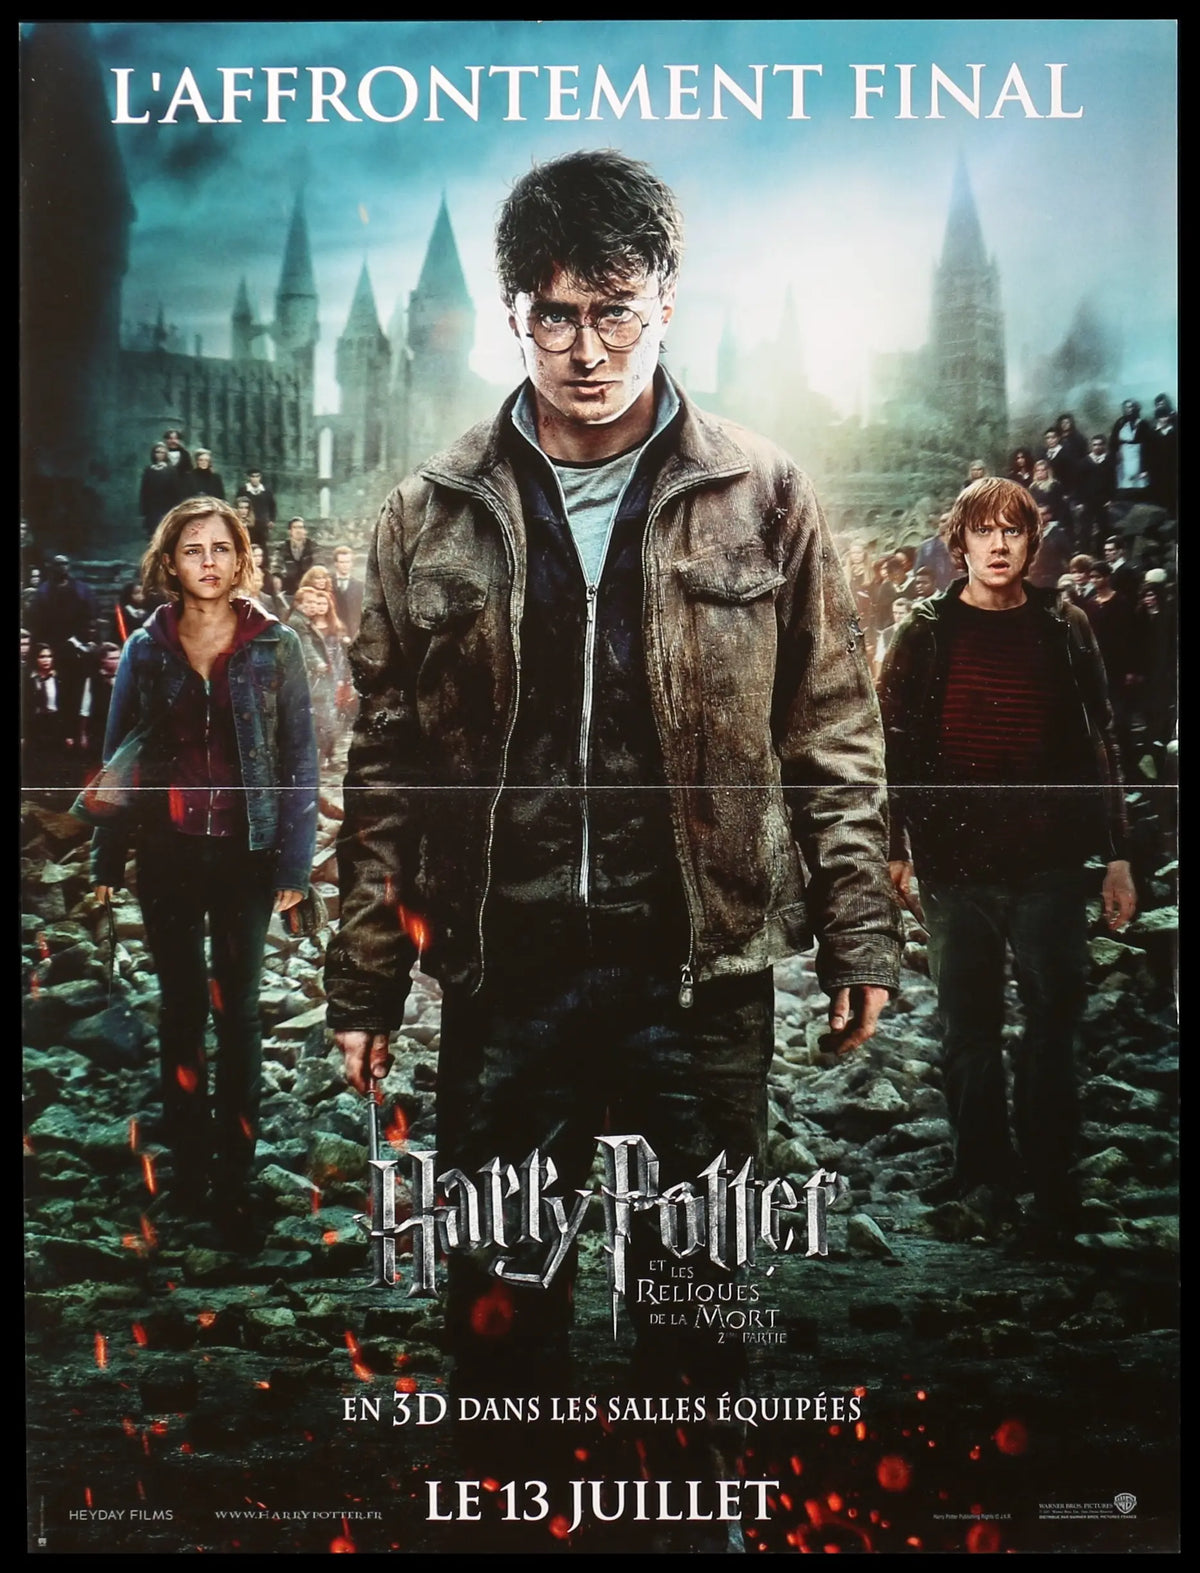 Harry Potter and the Deathly Hallows - Part 2 (2011) original movie poster for sale at Original Film Art